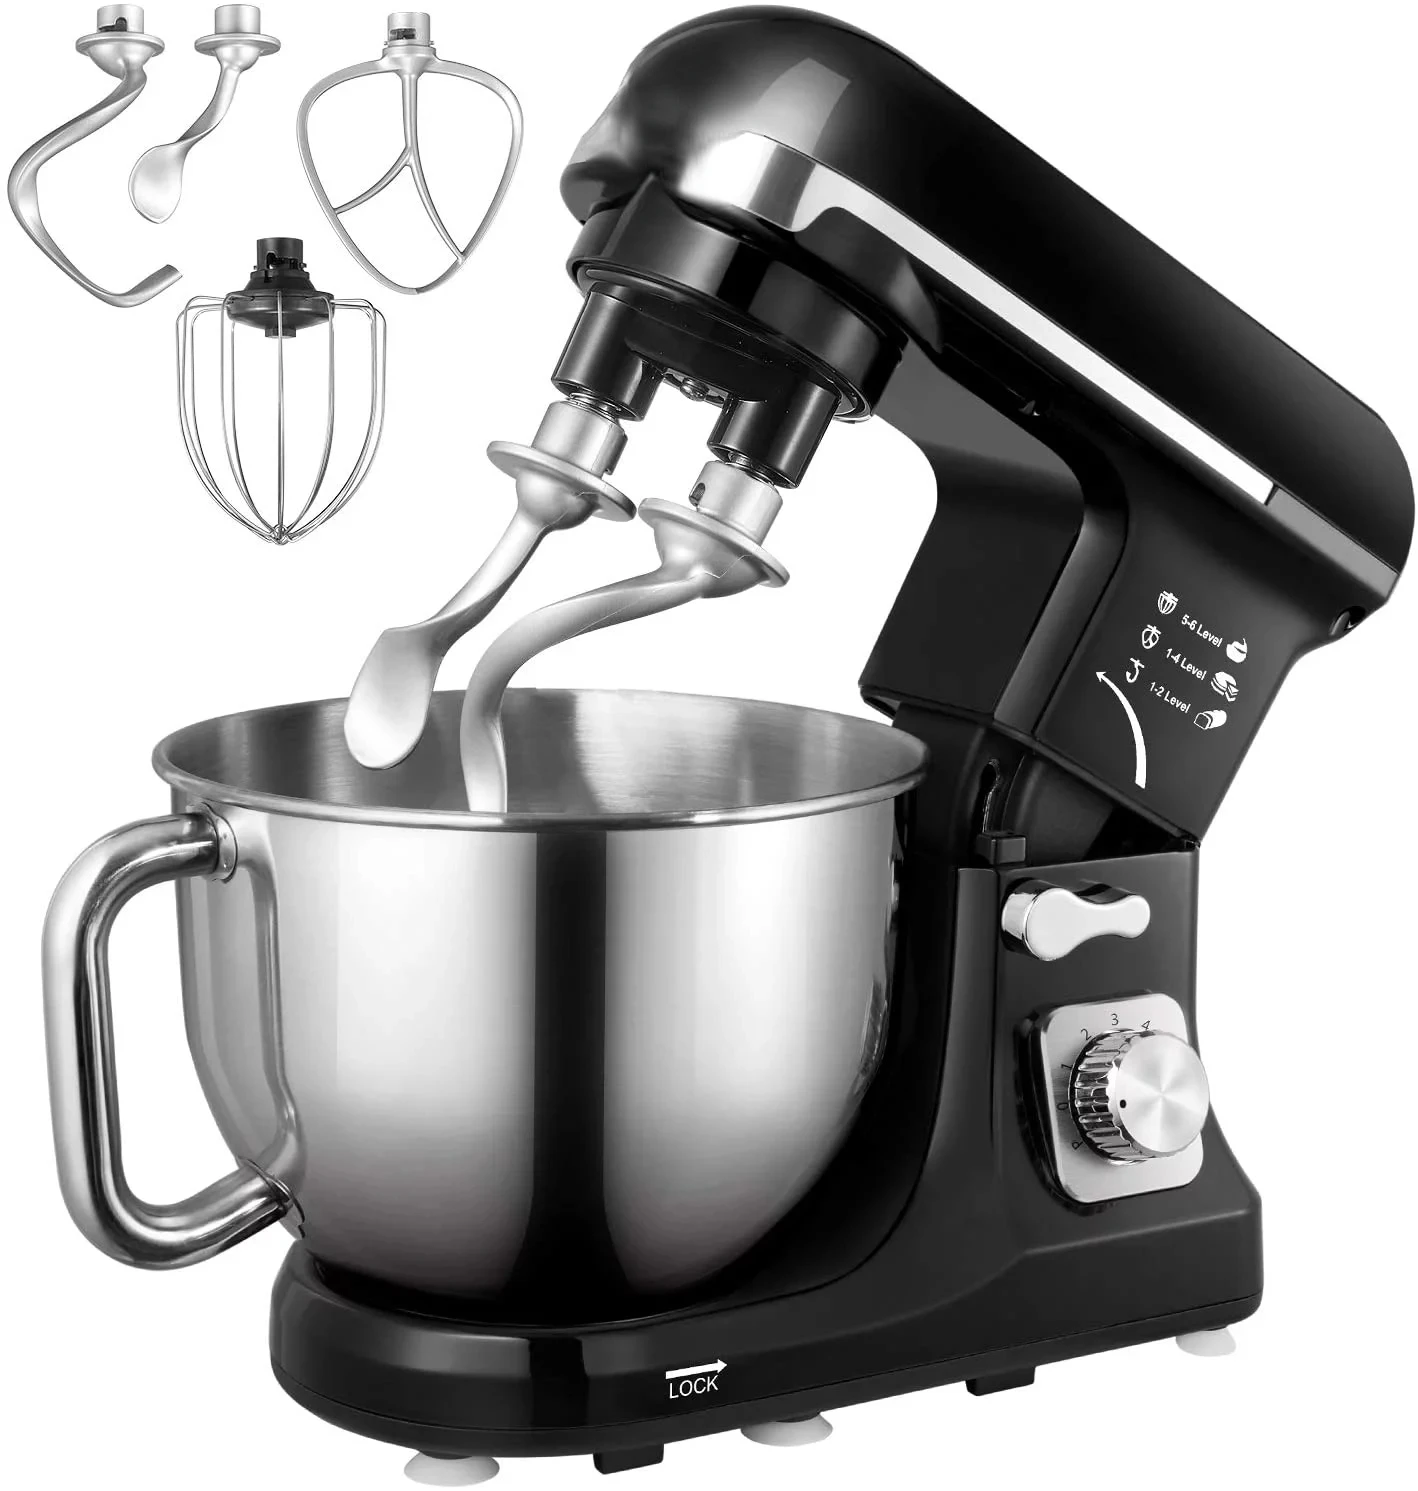 

Mixer with Double Hook, 6 Speeds, 5.5Qt Stainless Steel Bowl, Beater and Whisk Black